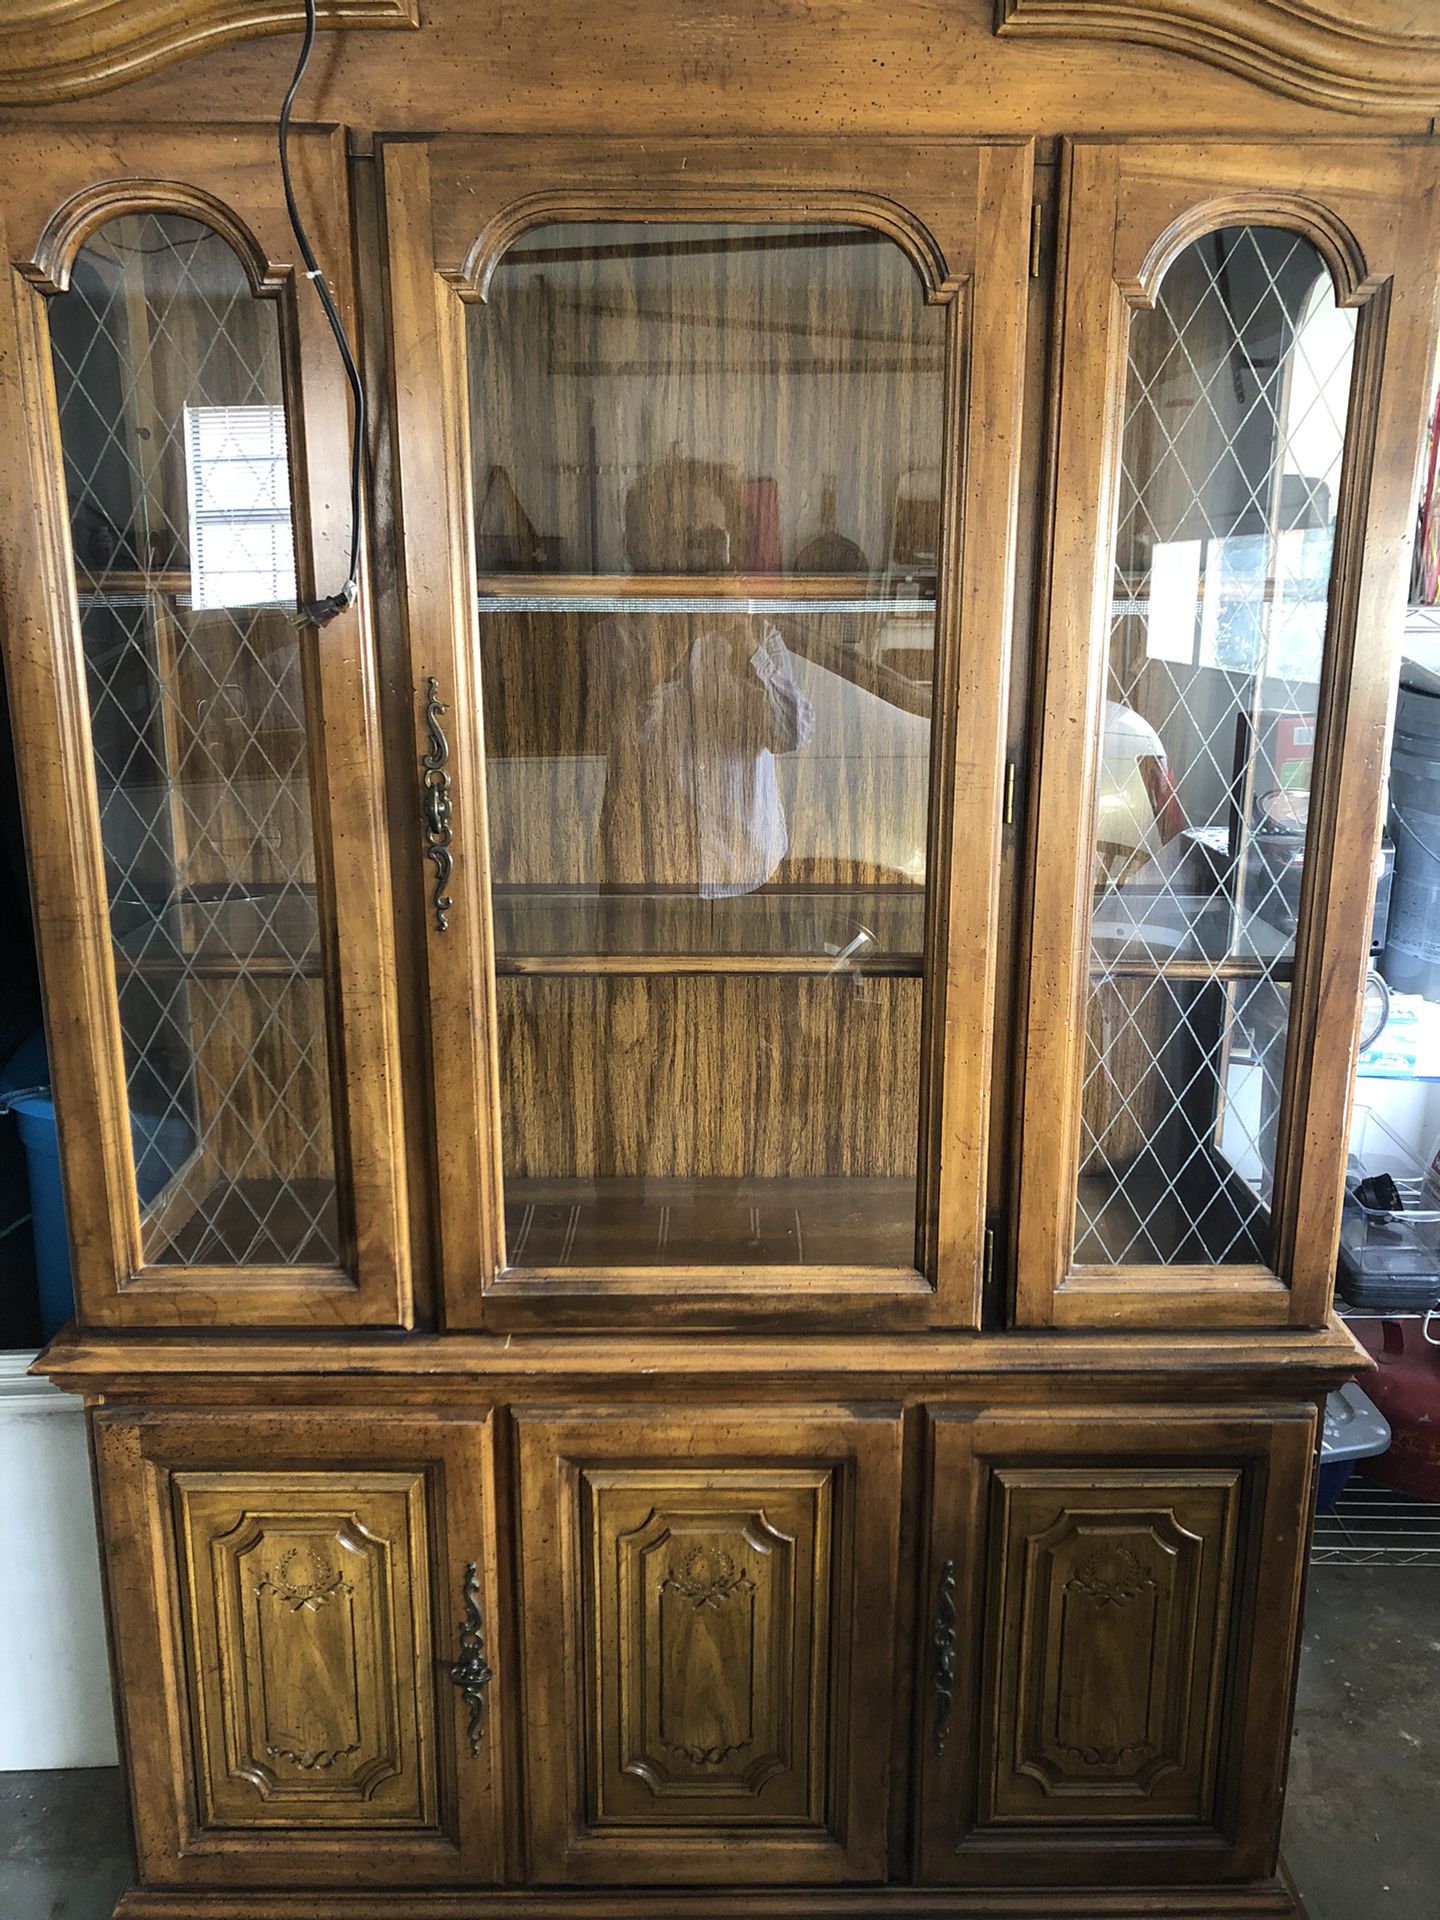 Lighted China Cabinet 